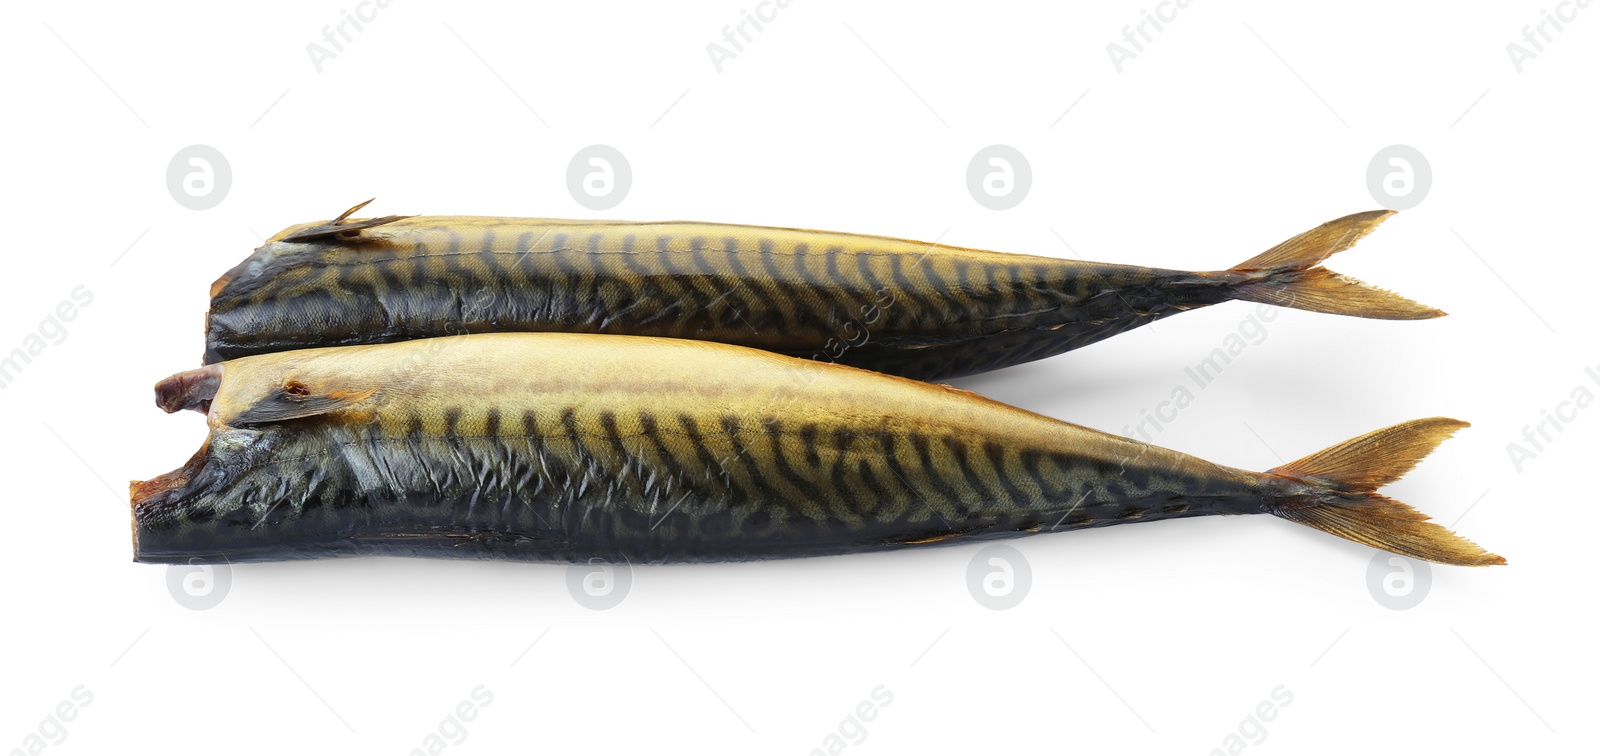 Photo of Delicious smoked mackerels isolated on white.
Seafood product